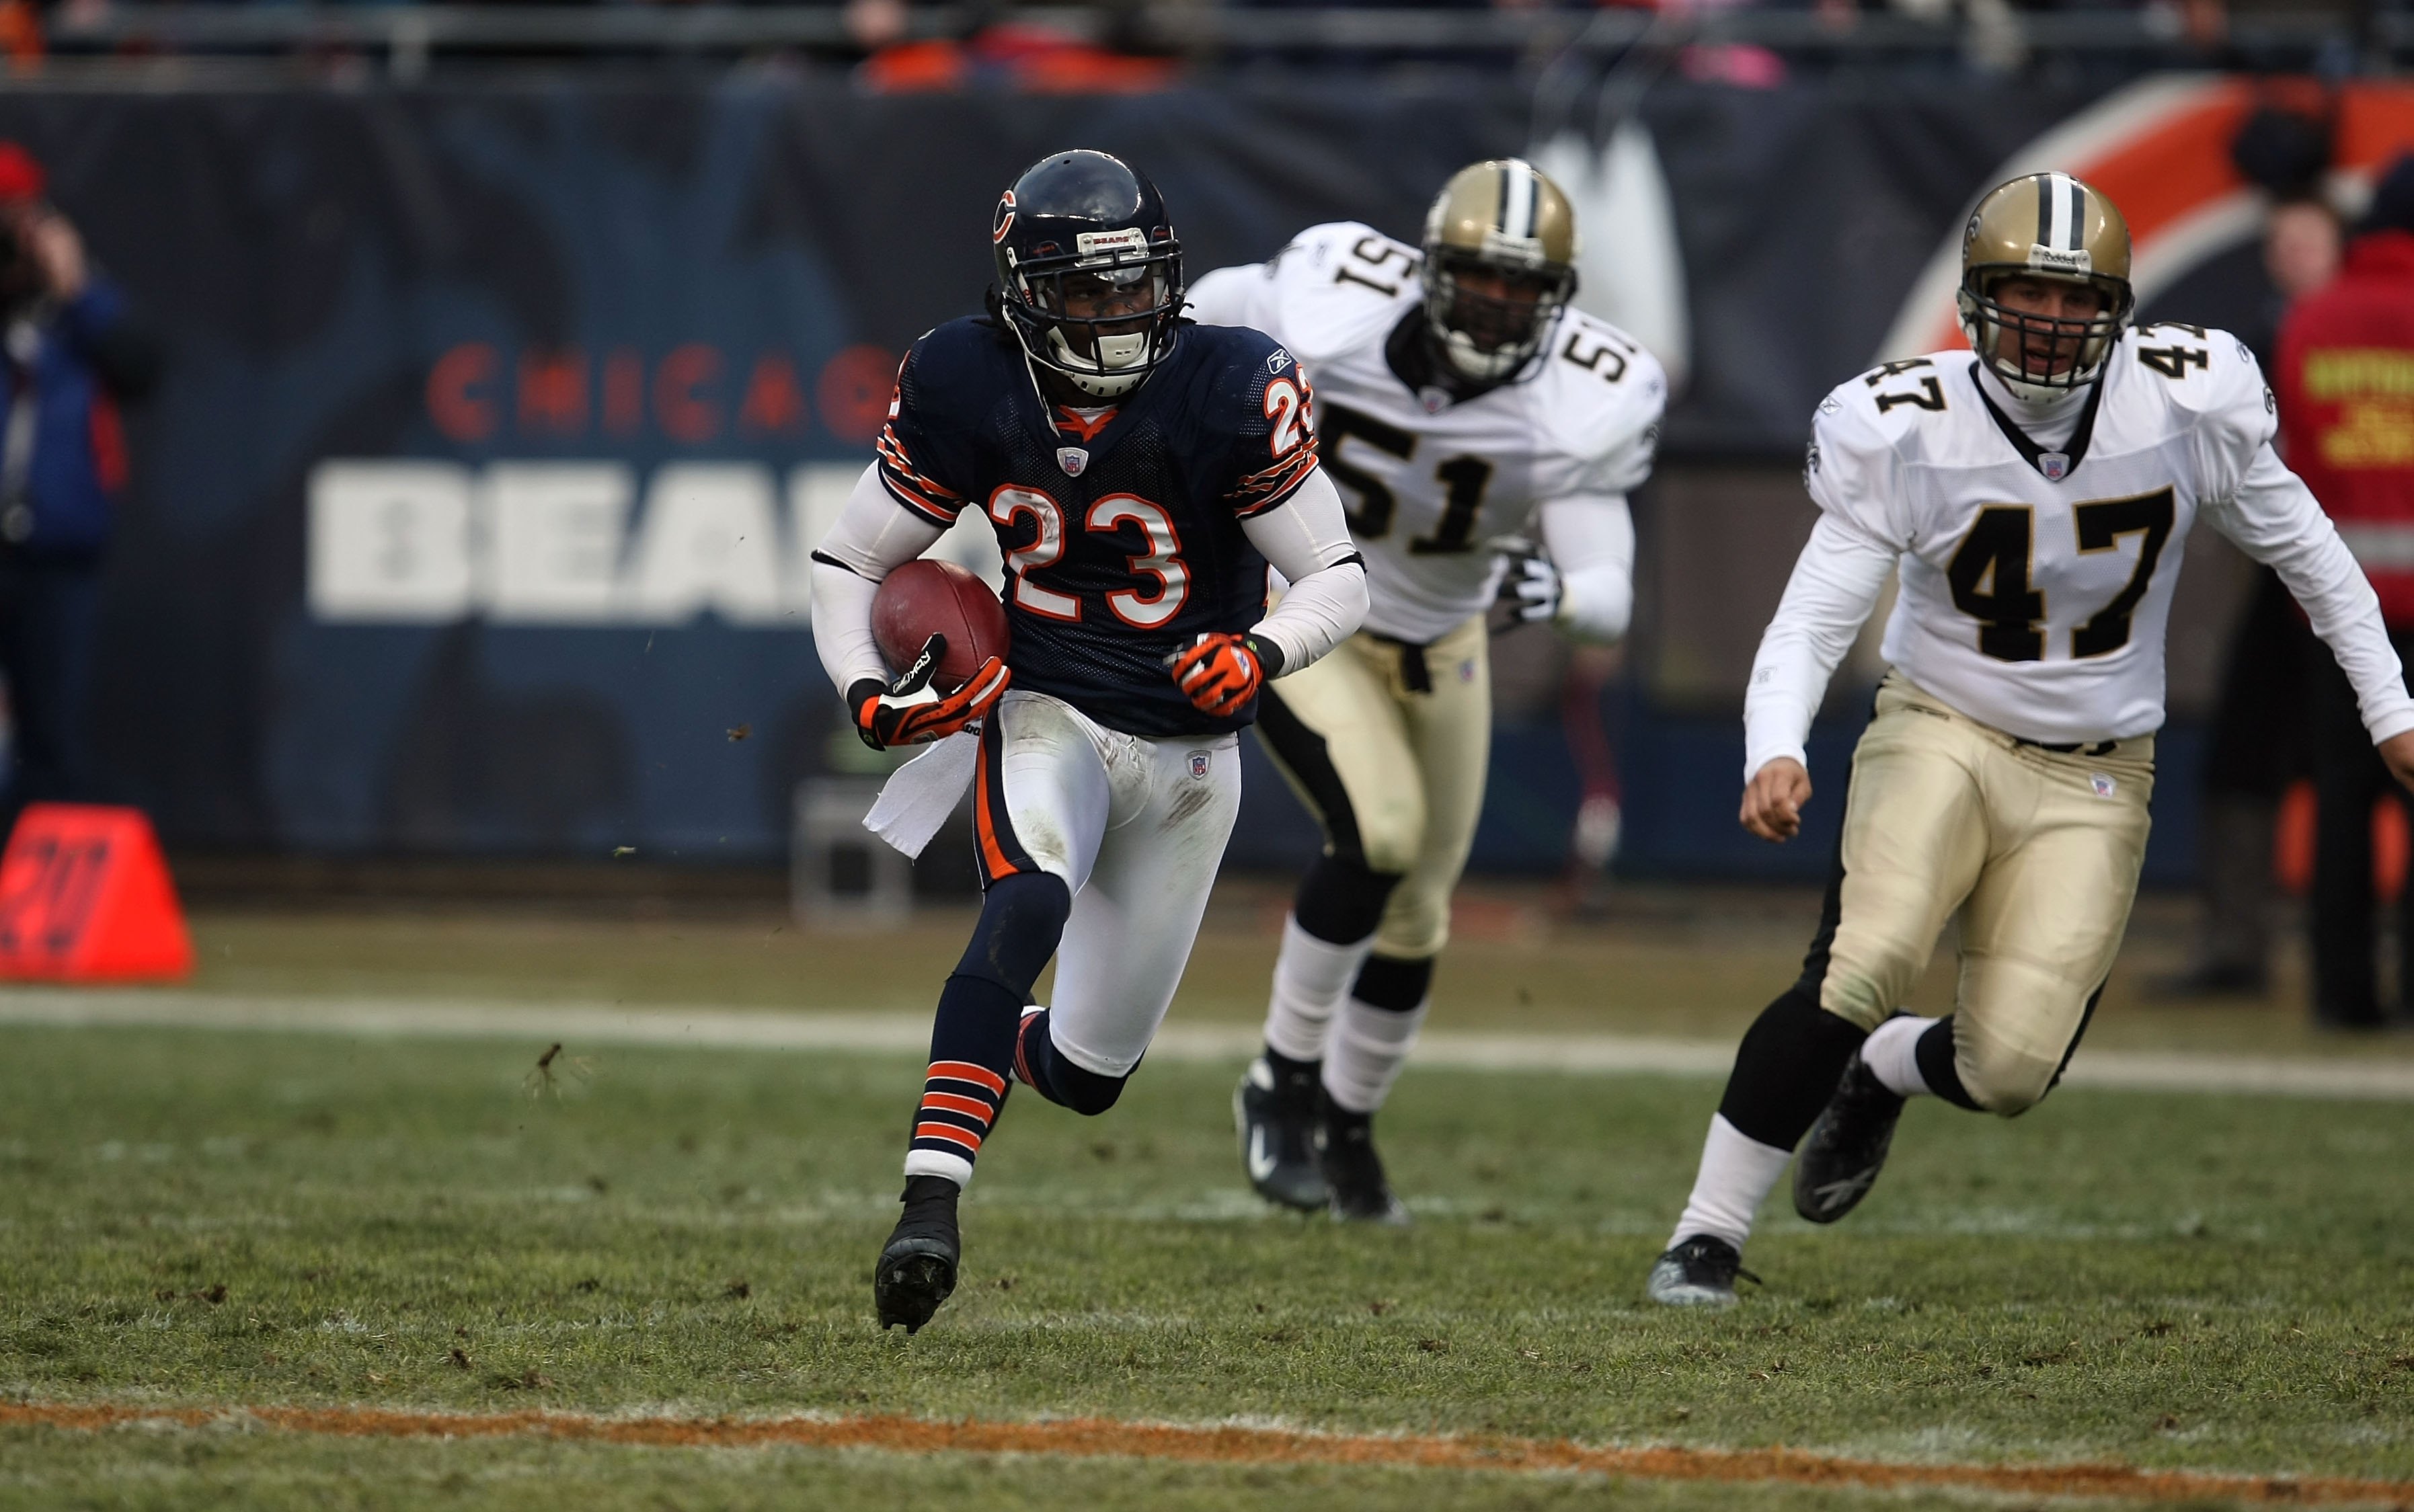 Devin Hester returning a kick during an NFL game